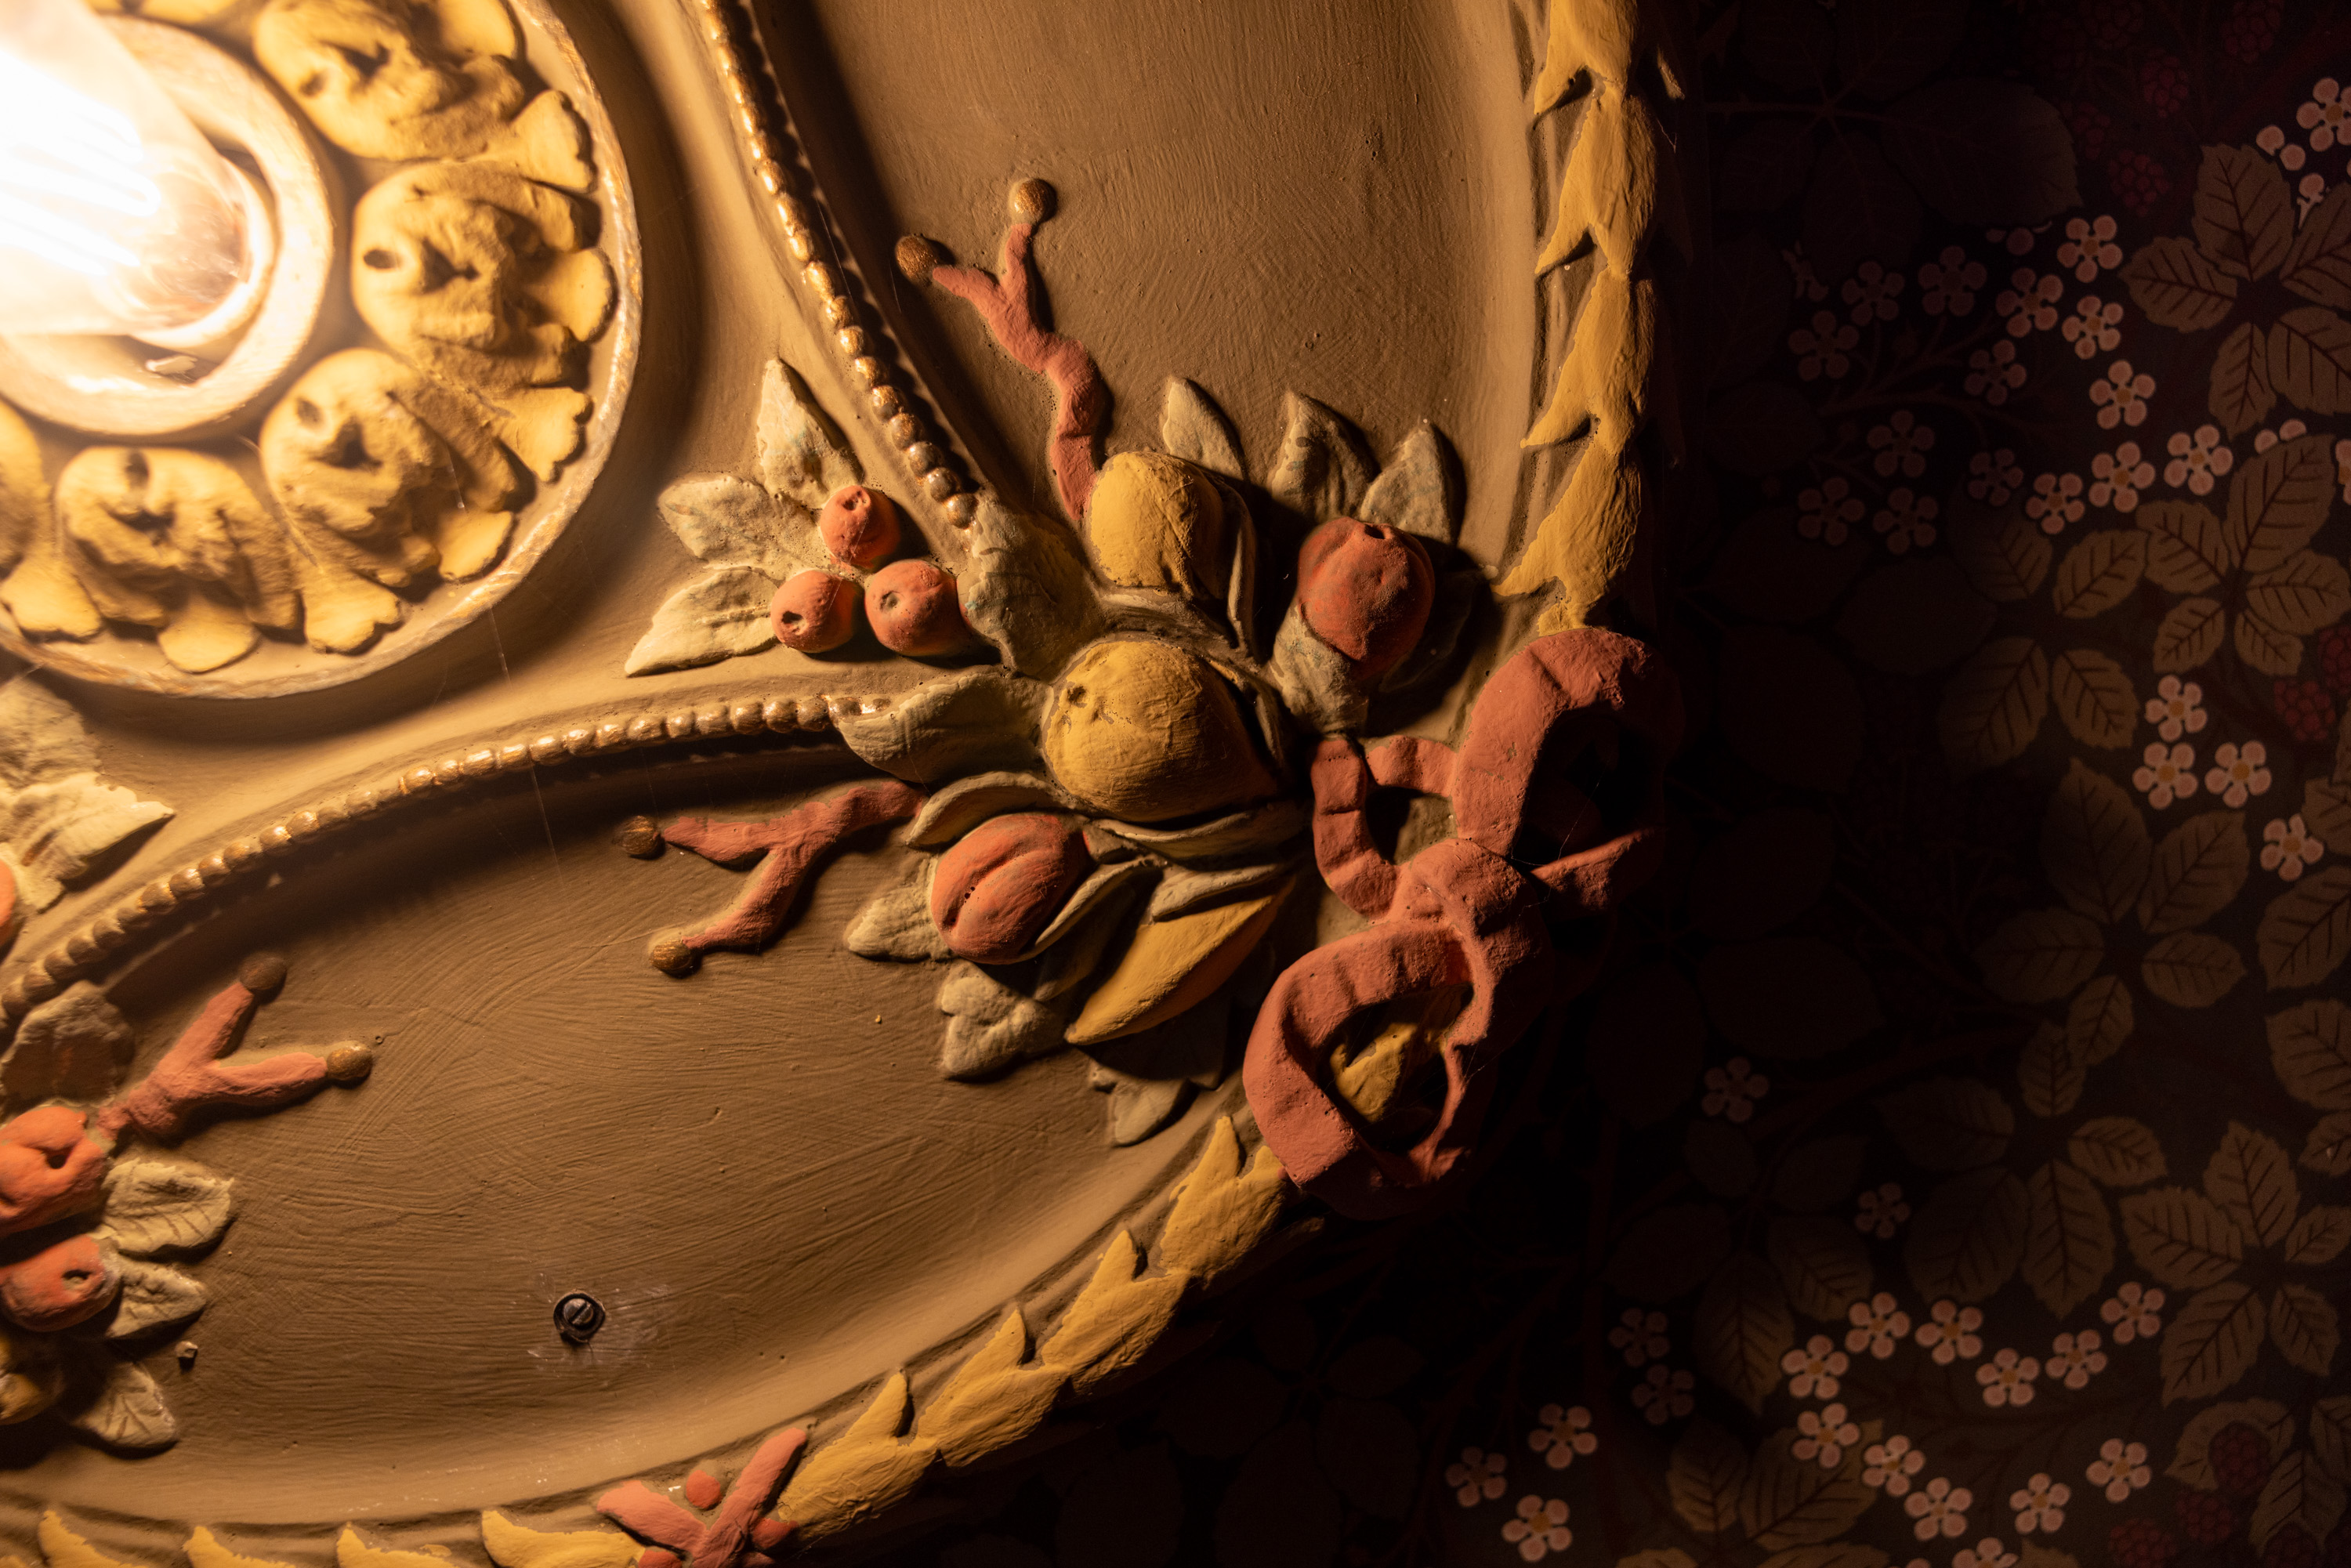 An ornate ceiling decoration with detailed carvings of fruits, leaves, and bows, illuminated by a nearby light bulb, is set against a patterned background.